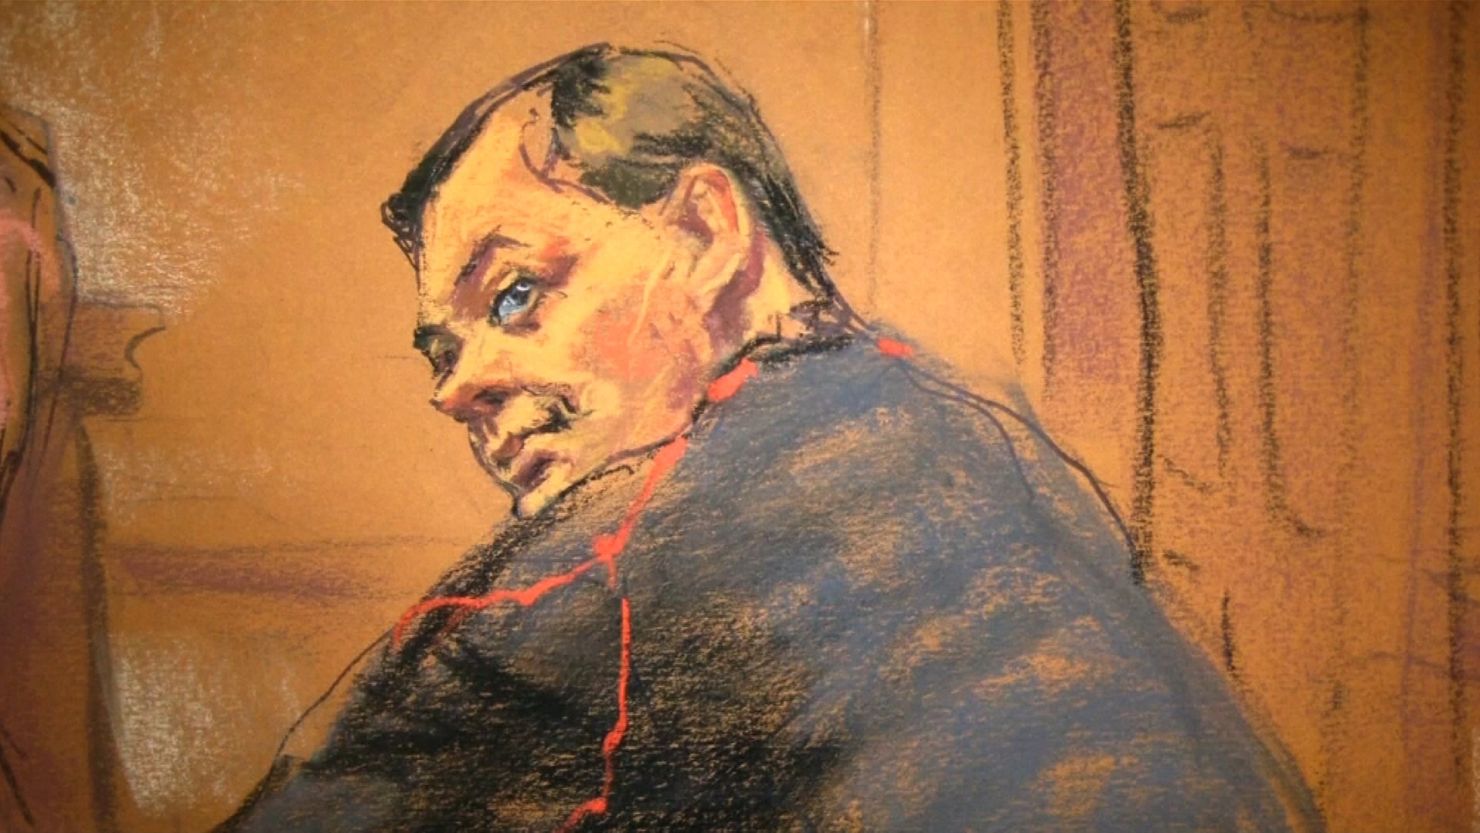 Court documents show that Evgeny Buryakov, seen here in a court sketch, began meeting with an undercover FBI agent who he believed to be an energy company analyst in 2012.